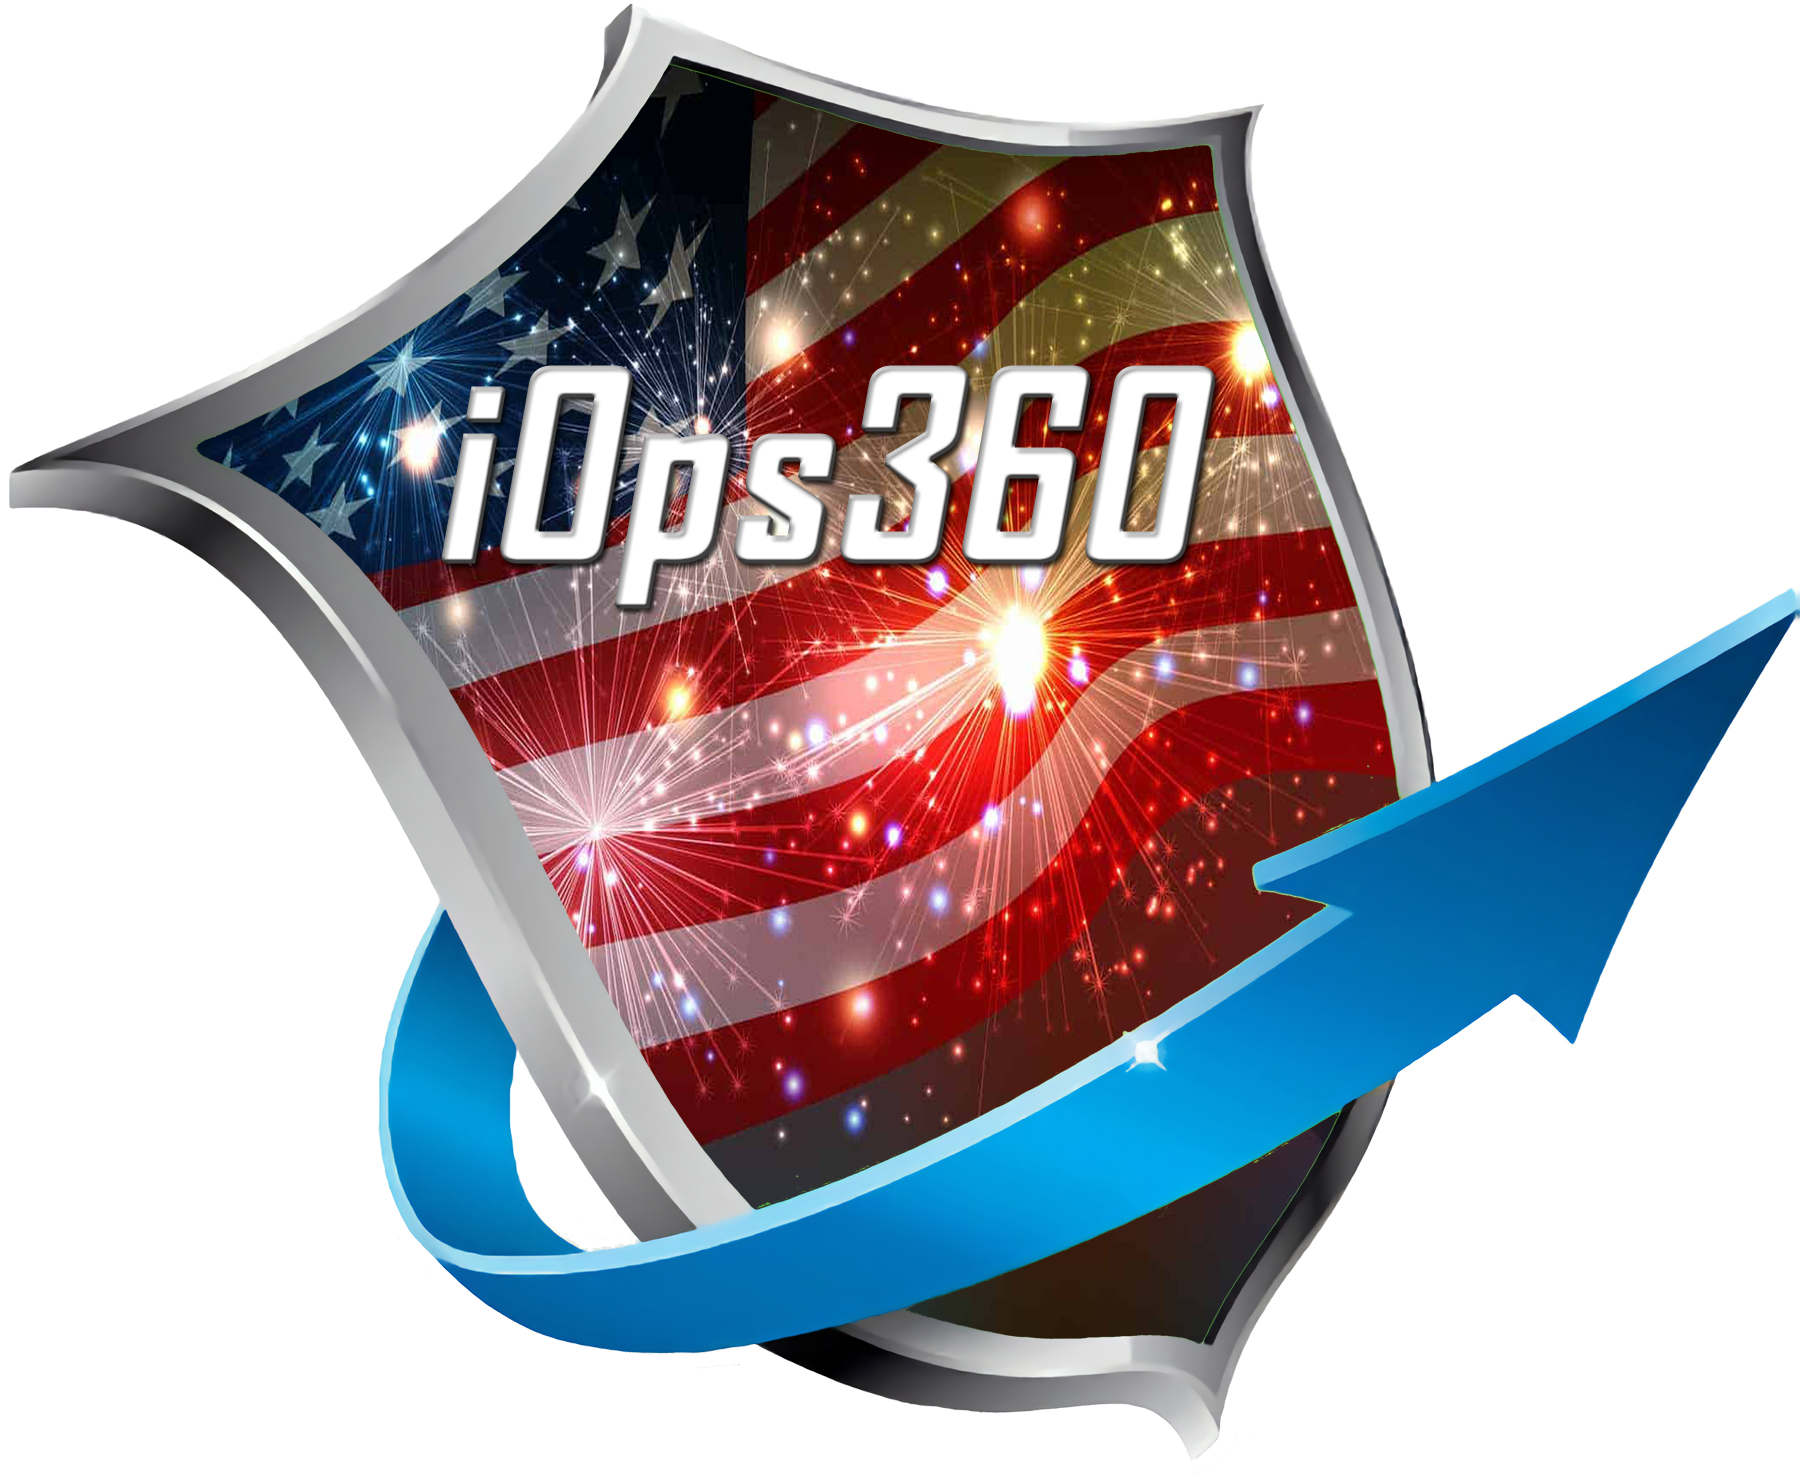 iOps360 July 4th Police Fire Department EMS Schedule Software Ambulance Software